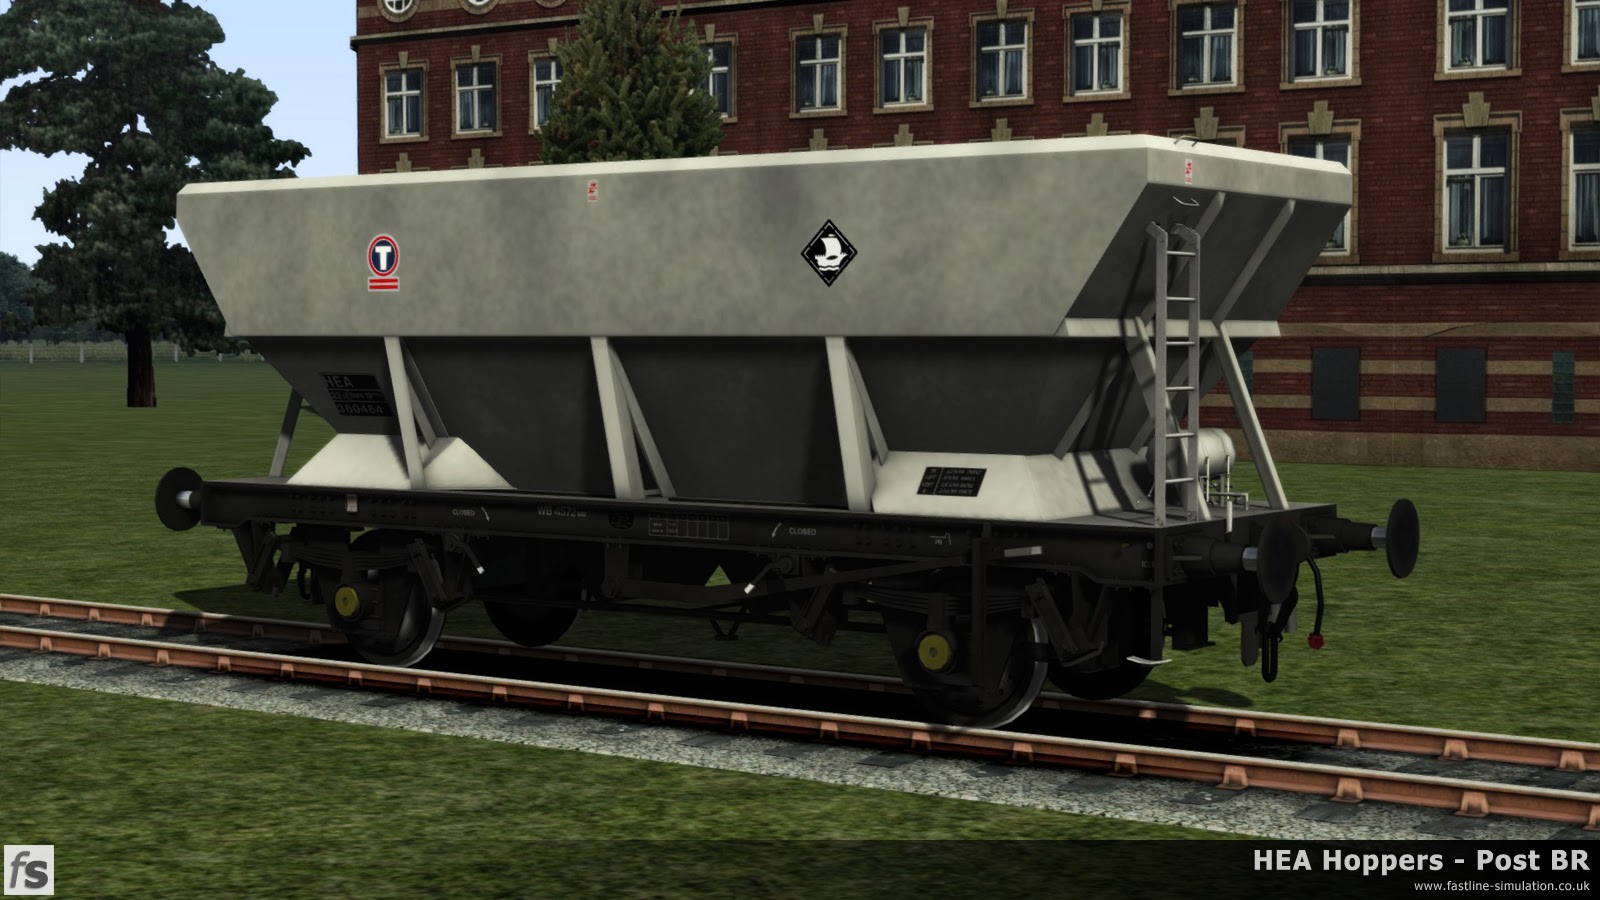 HEA Hoppers - Post BR: A work in progress picture of one of the later offset ladder HEA hoppers in almost ex-works Transrail livery under development for Train Simulator 2014.